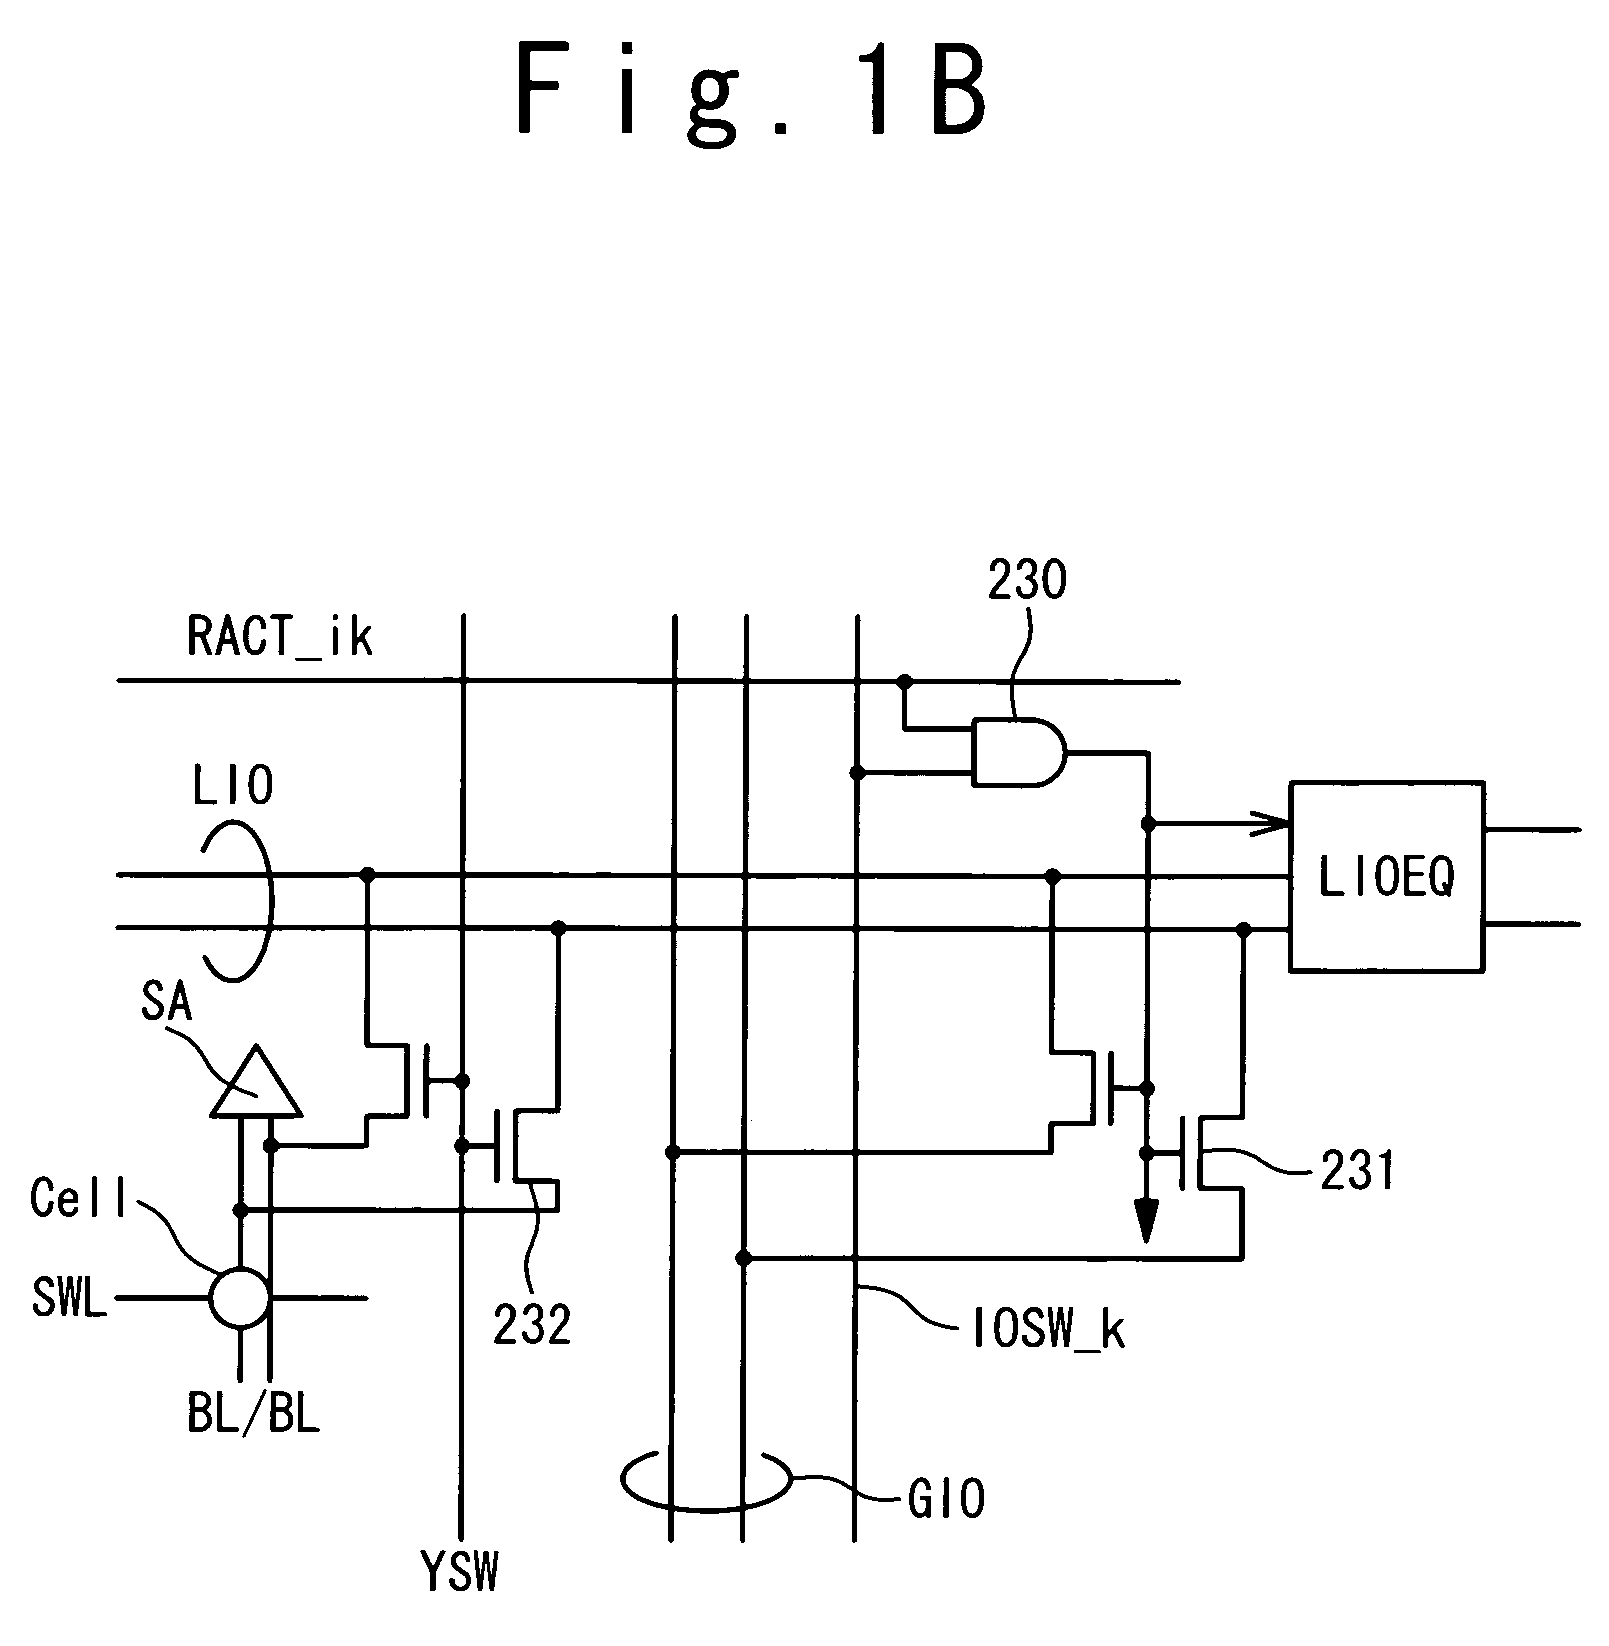 Semiconductor memory device with hierarchical I/O line architecture